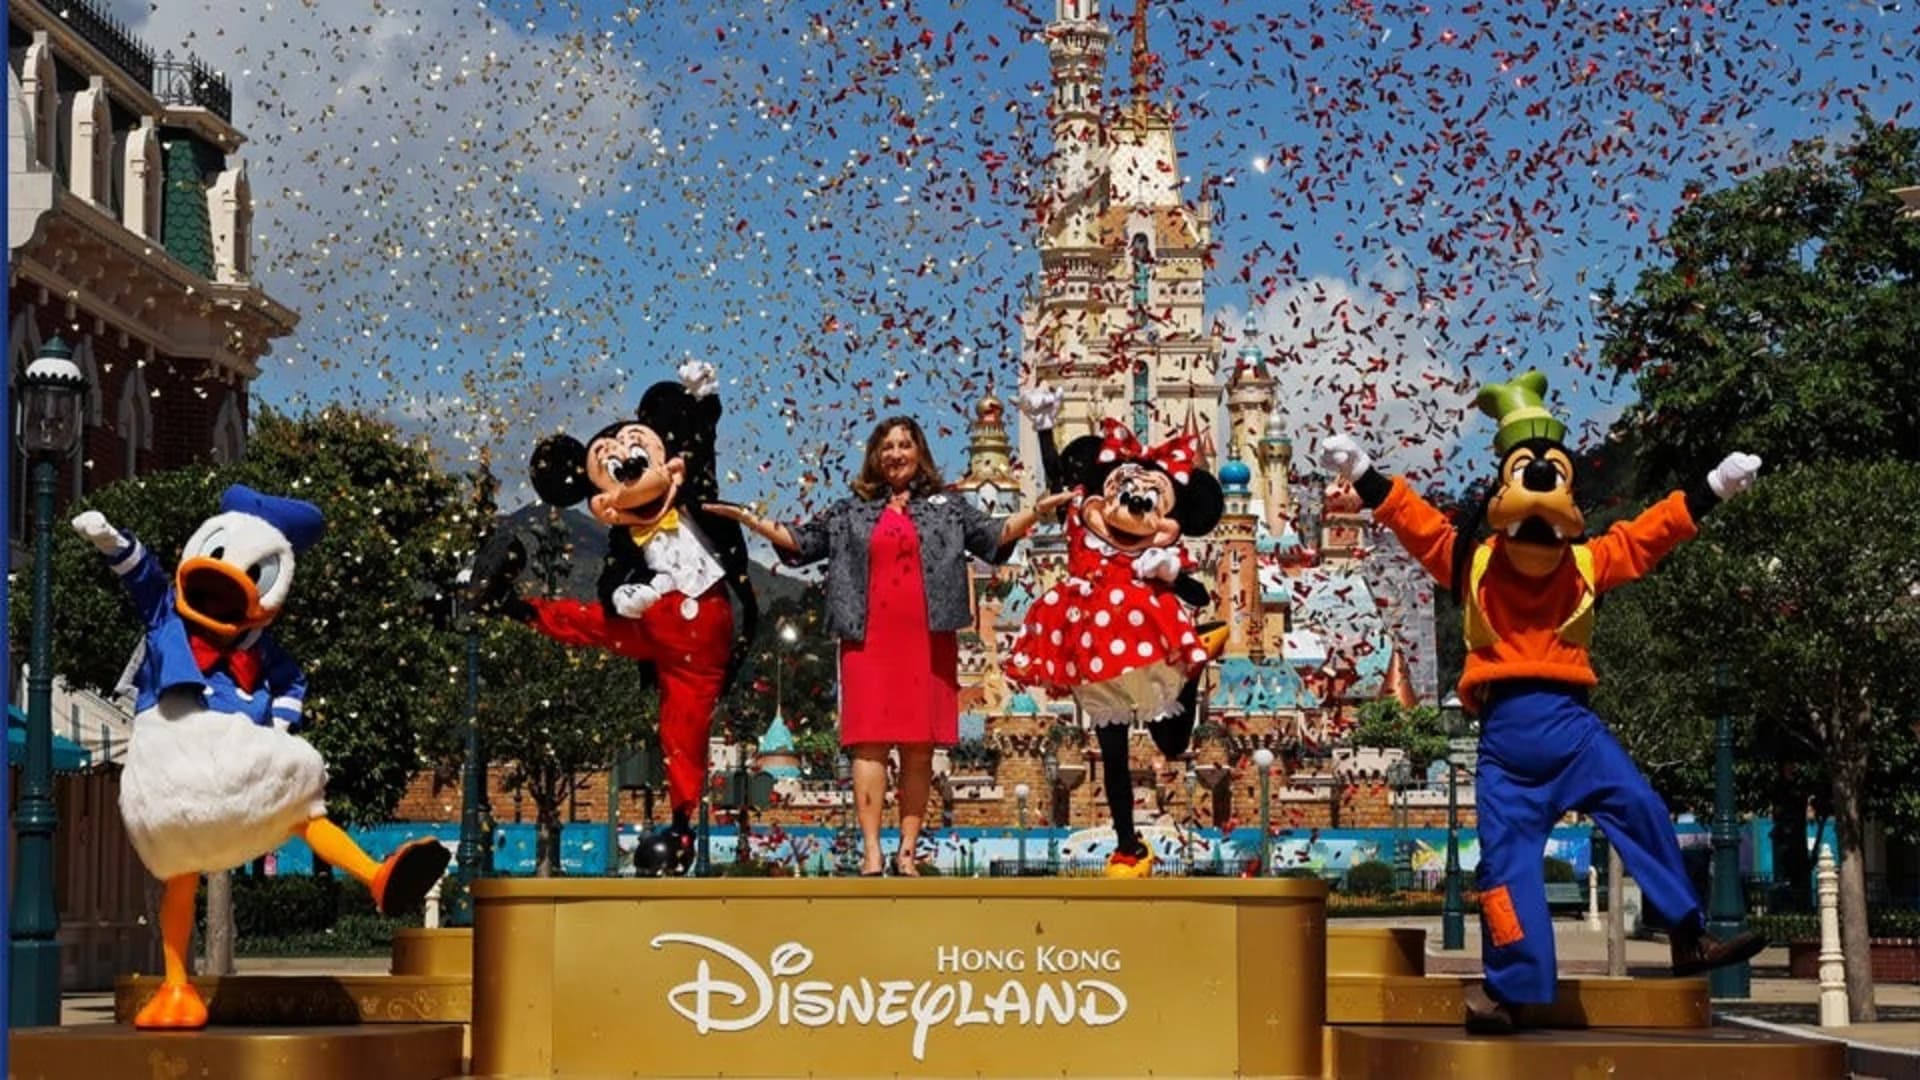 Hong Kong Disneyland Park temporarily closes again amid spike in COVID-19 cases